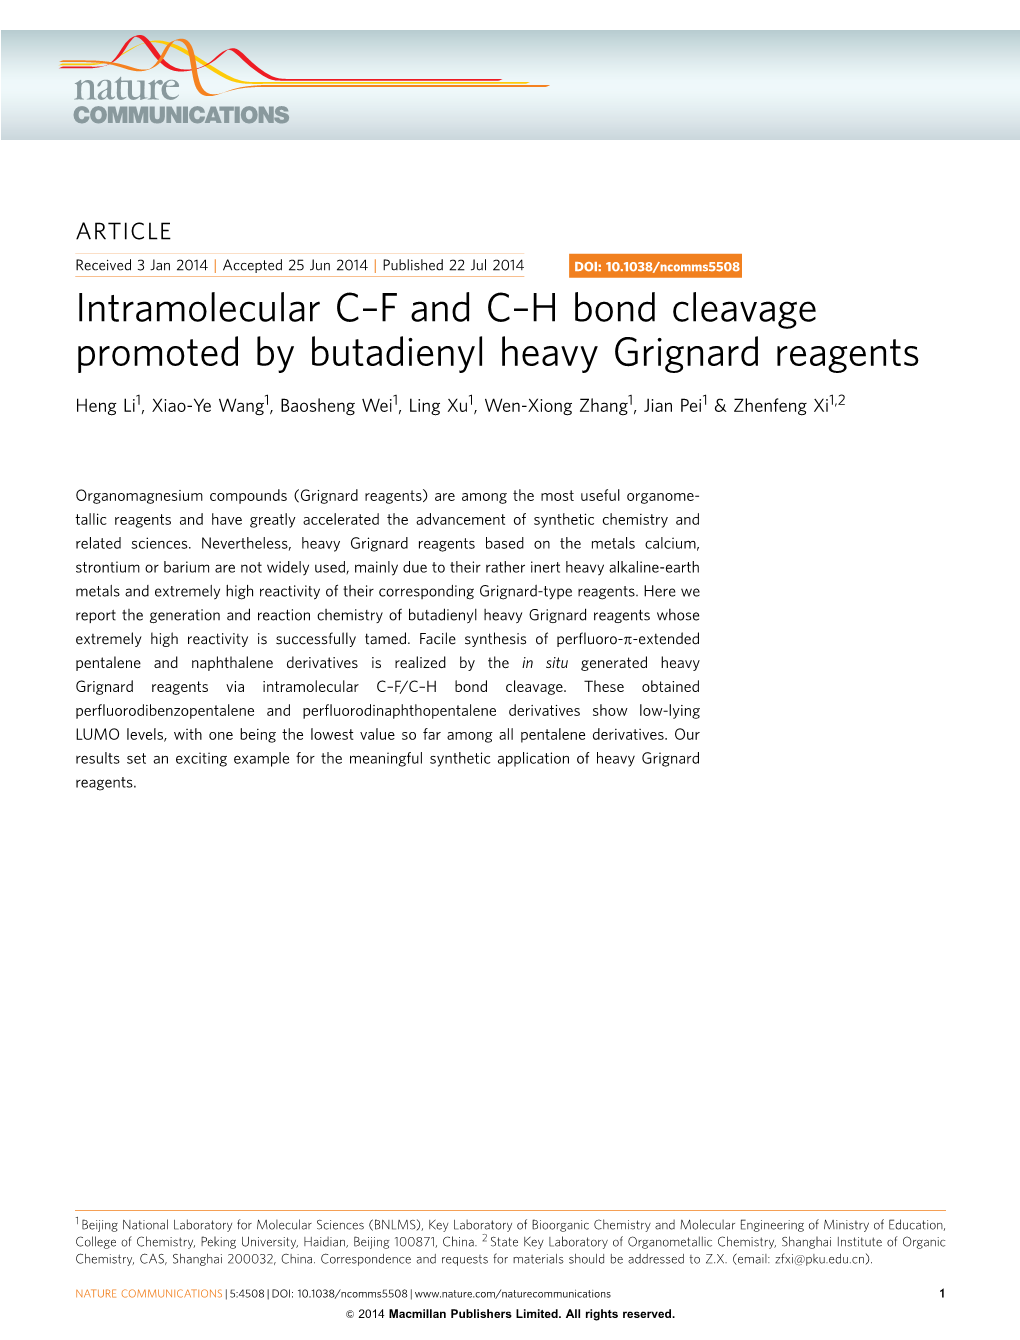 H Bond Cleavage Promoted by Butadienyl Heavy Grignard Reagents